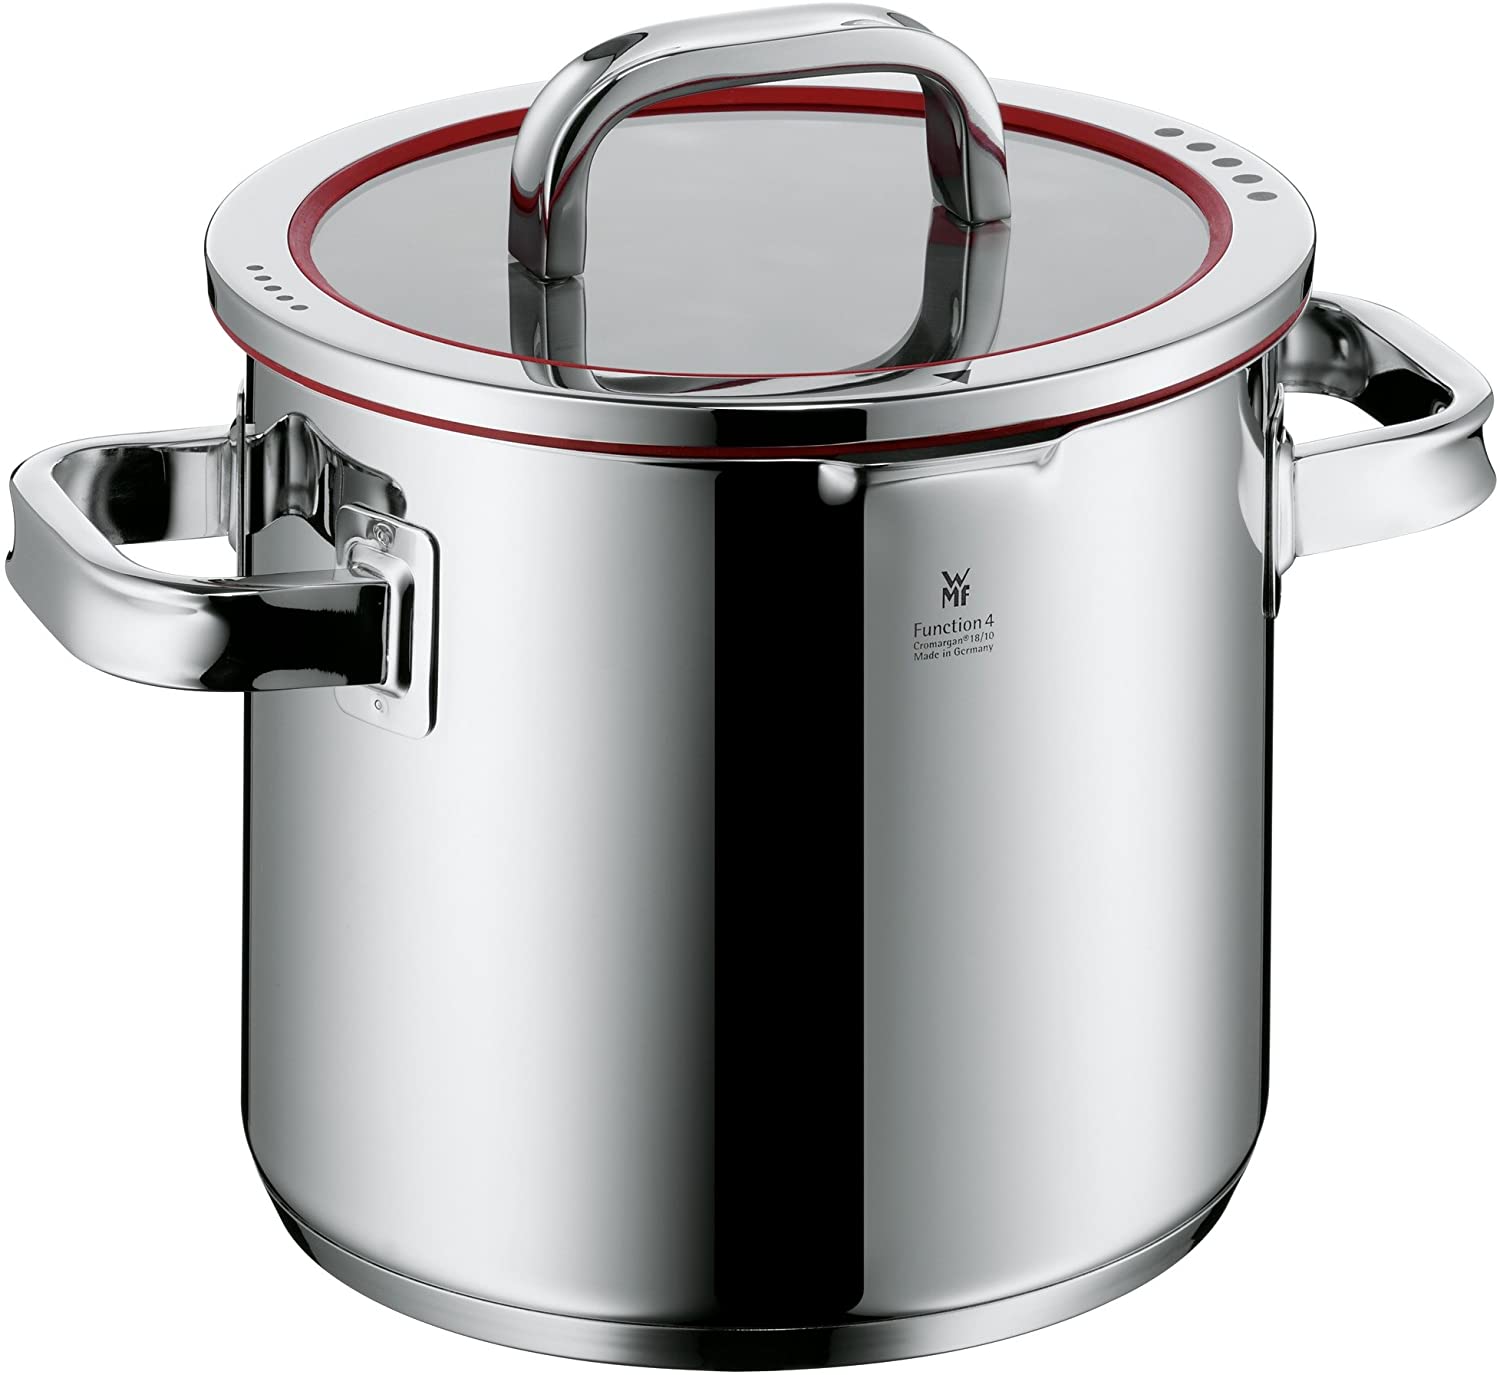 WMF Stock pot Ø 20 cm approx. 5,3l Function 4 Inside scaling lid - pour off or decant liquids without spilling to keep your dishes and cooker clean. Hollow side handles glass lid Cromargan stainless steel brushed suitable for all stove tops including induction dishwasher-safe